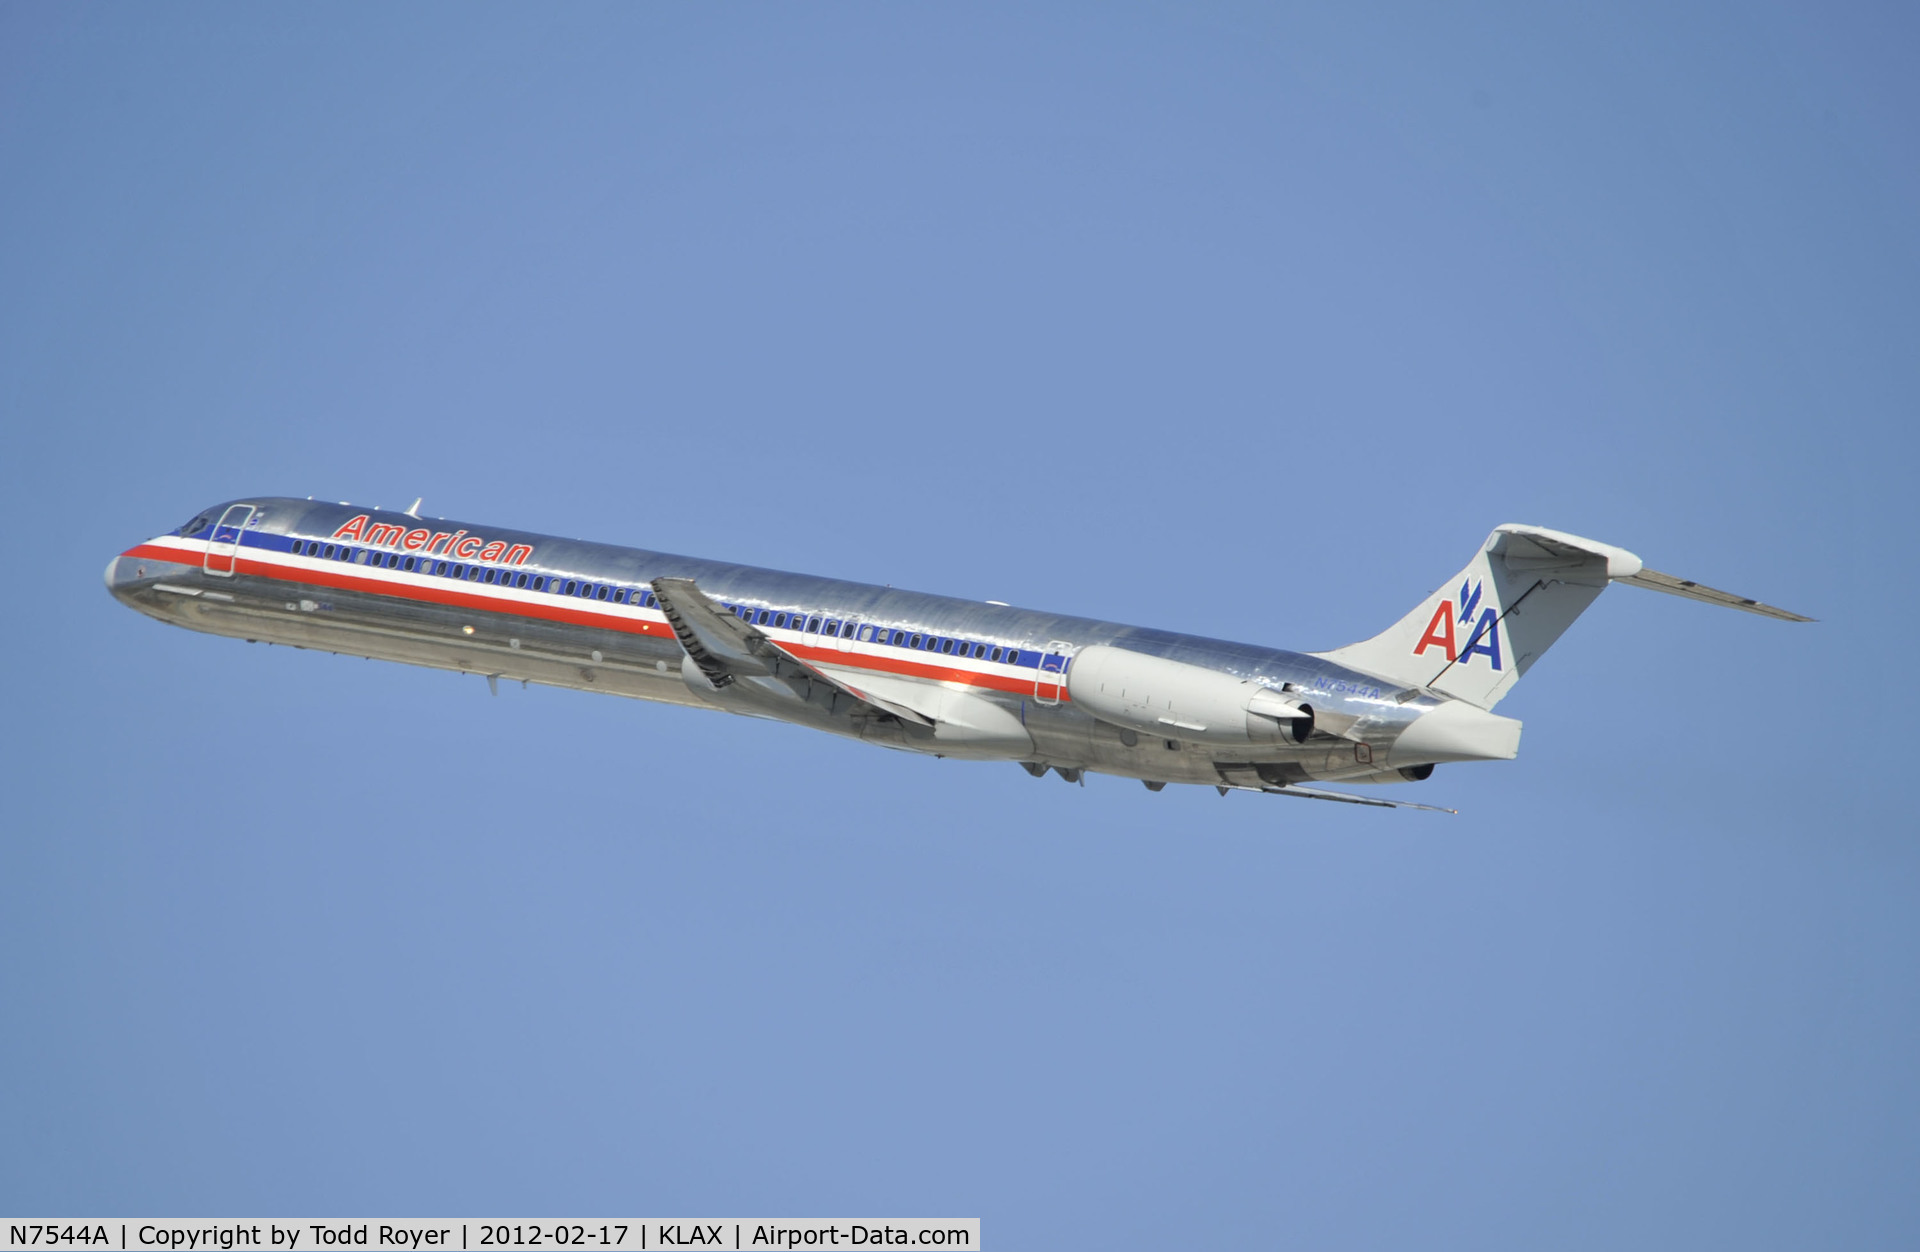 N7544A, 1990 McDonnell Douglas MD-82 (DC-9-82) C/N 53026, Departing LAX on 25R